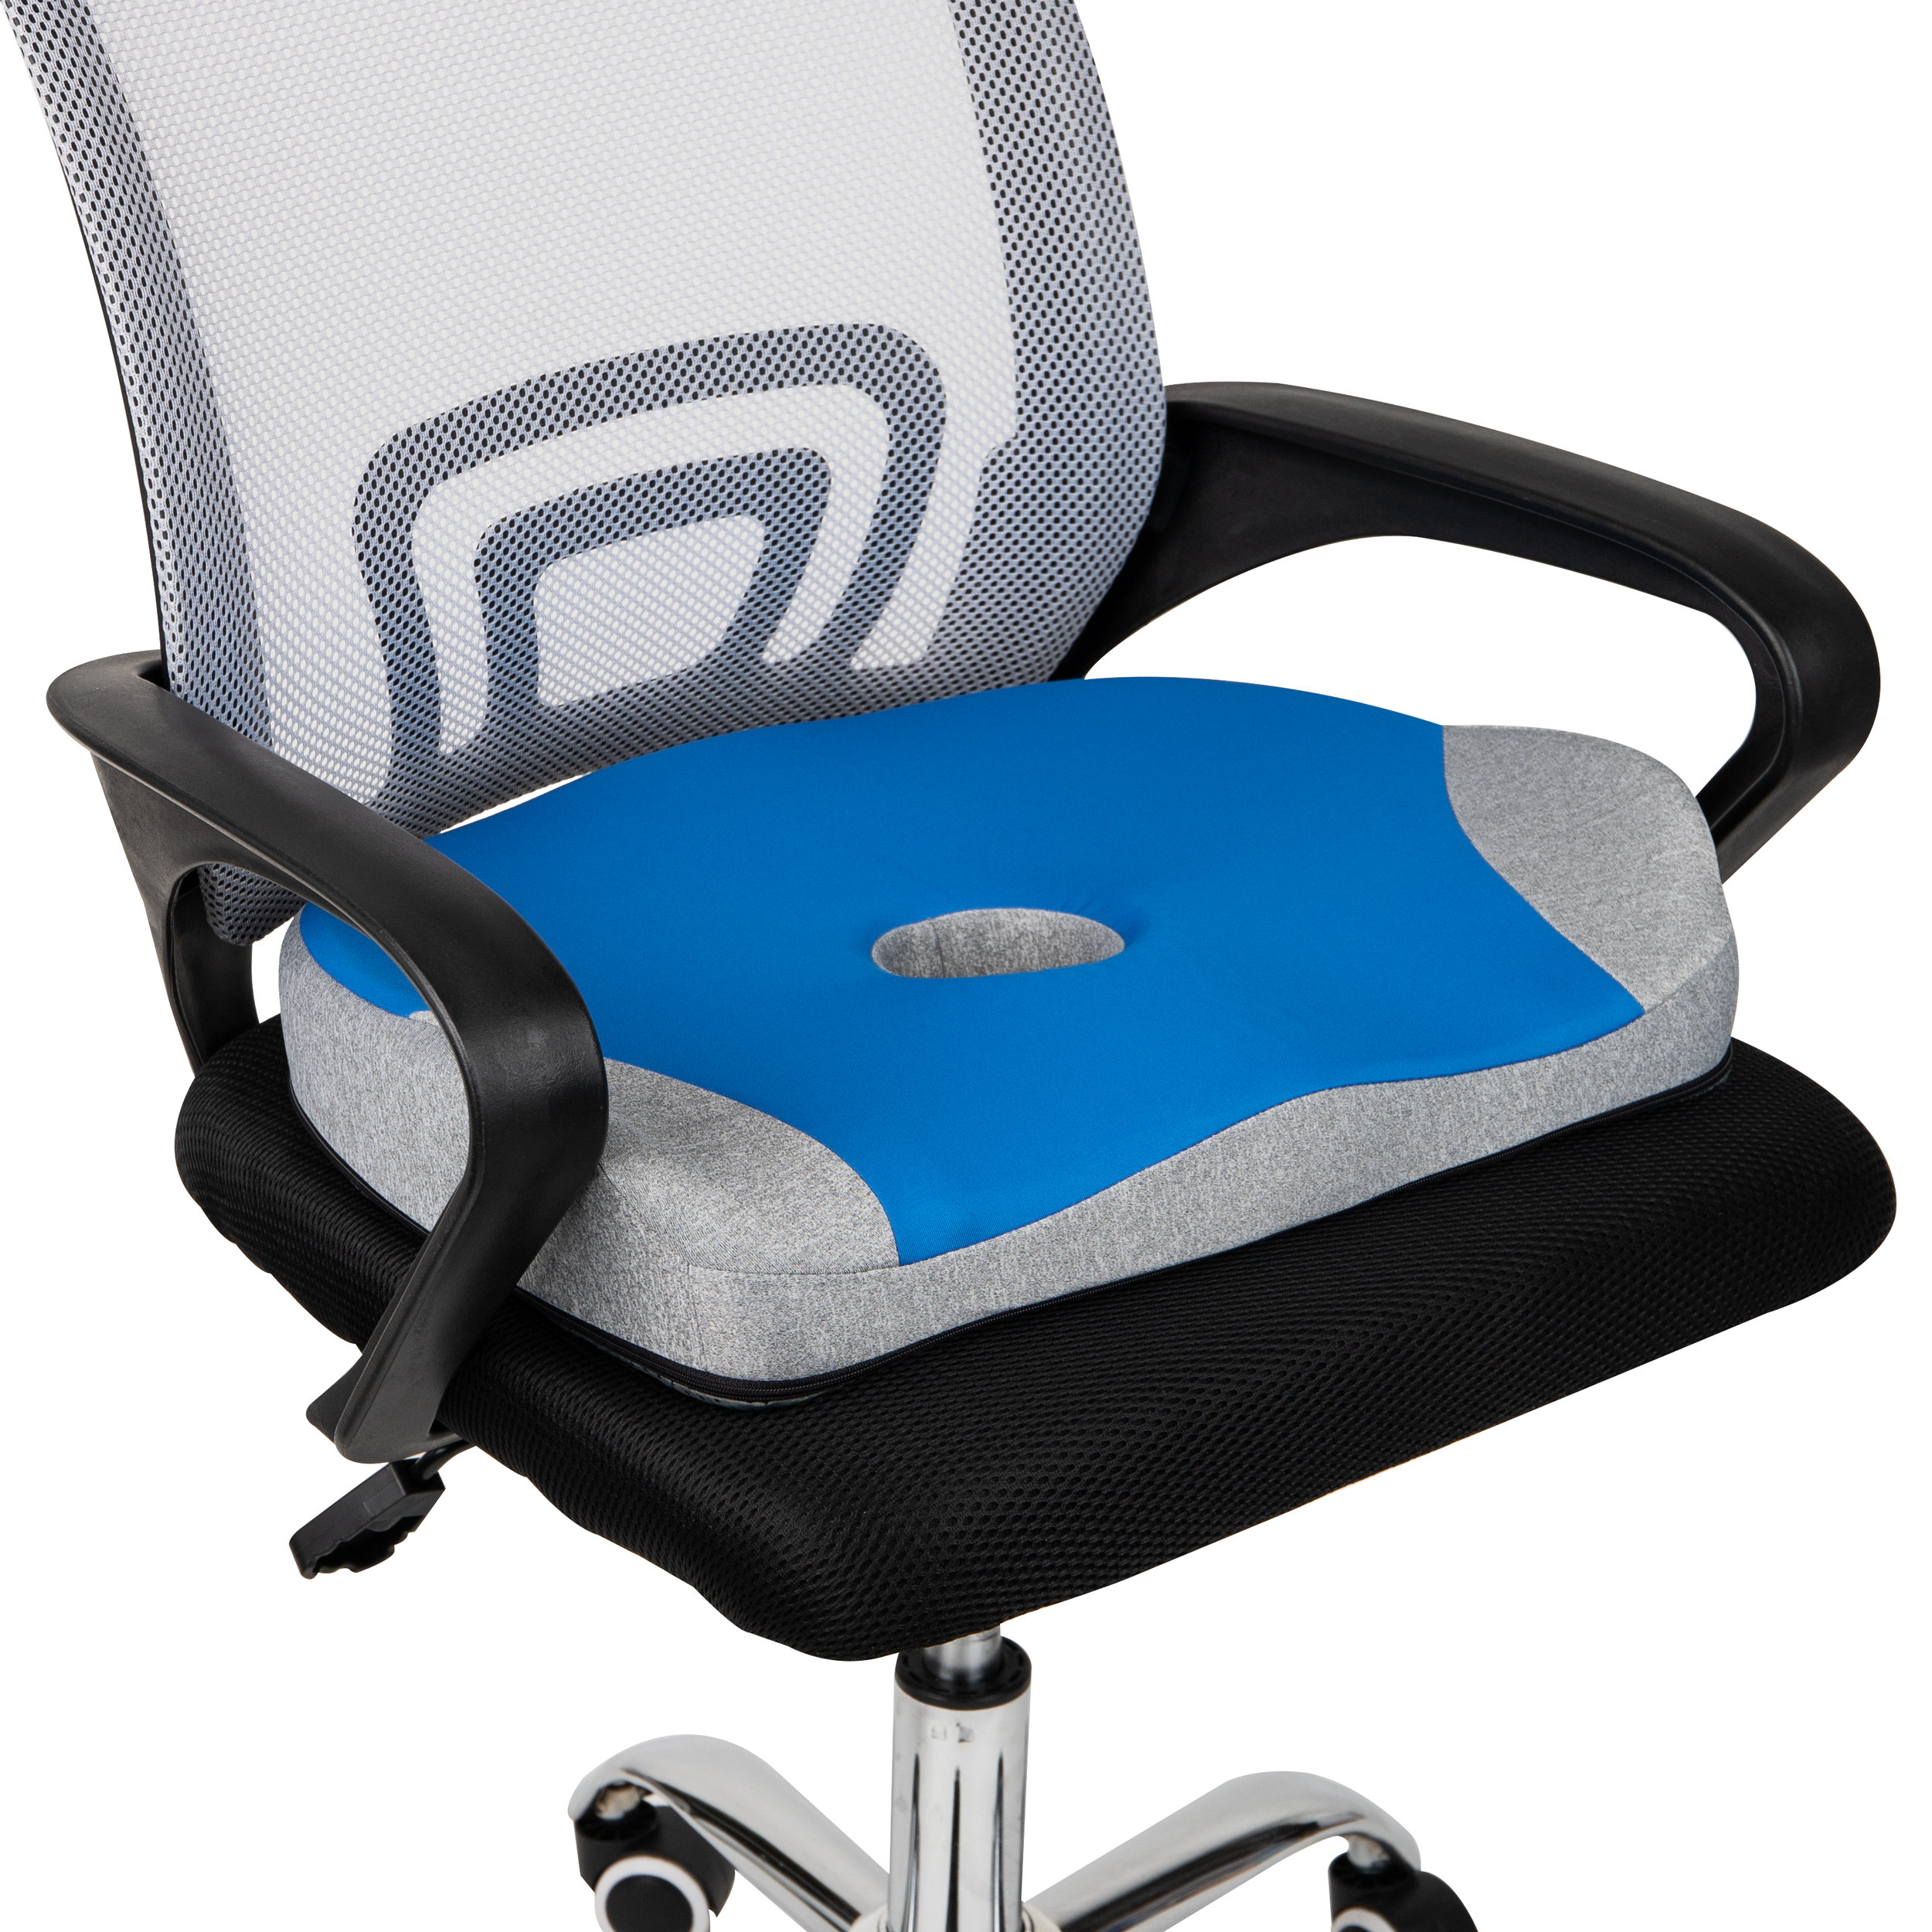 Sleepavo Gel Seat Cushion - Seat Cushions for Office Chairs for